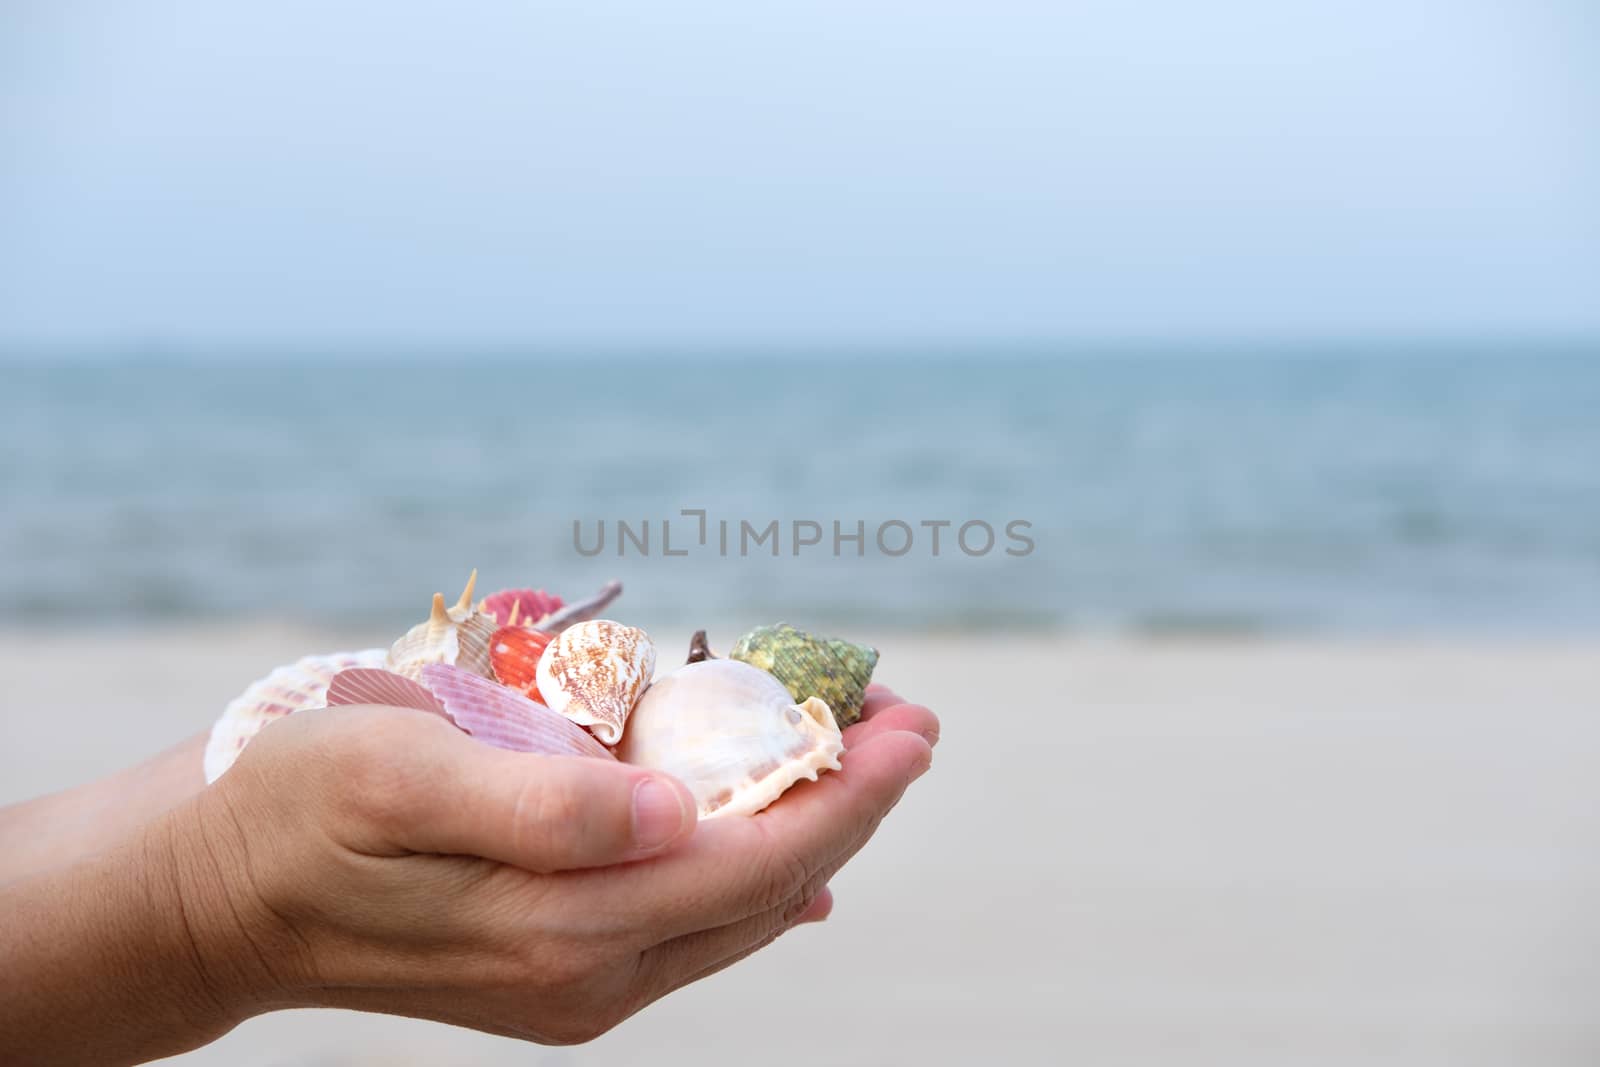 Many shells on woman's hands in sunset light.